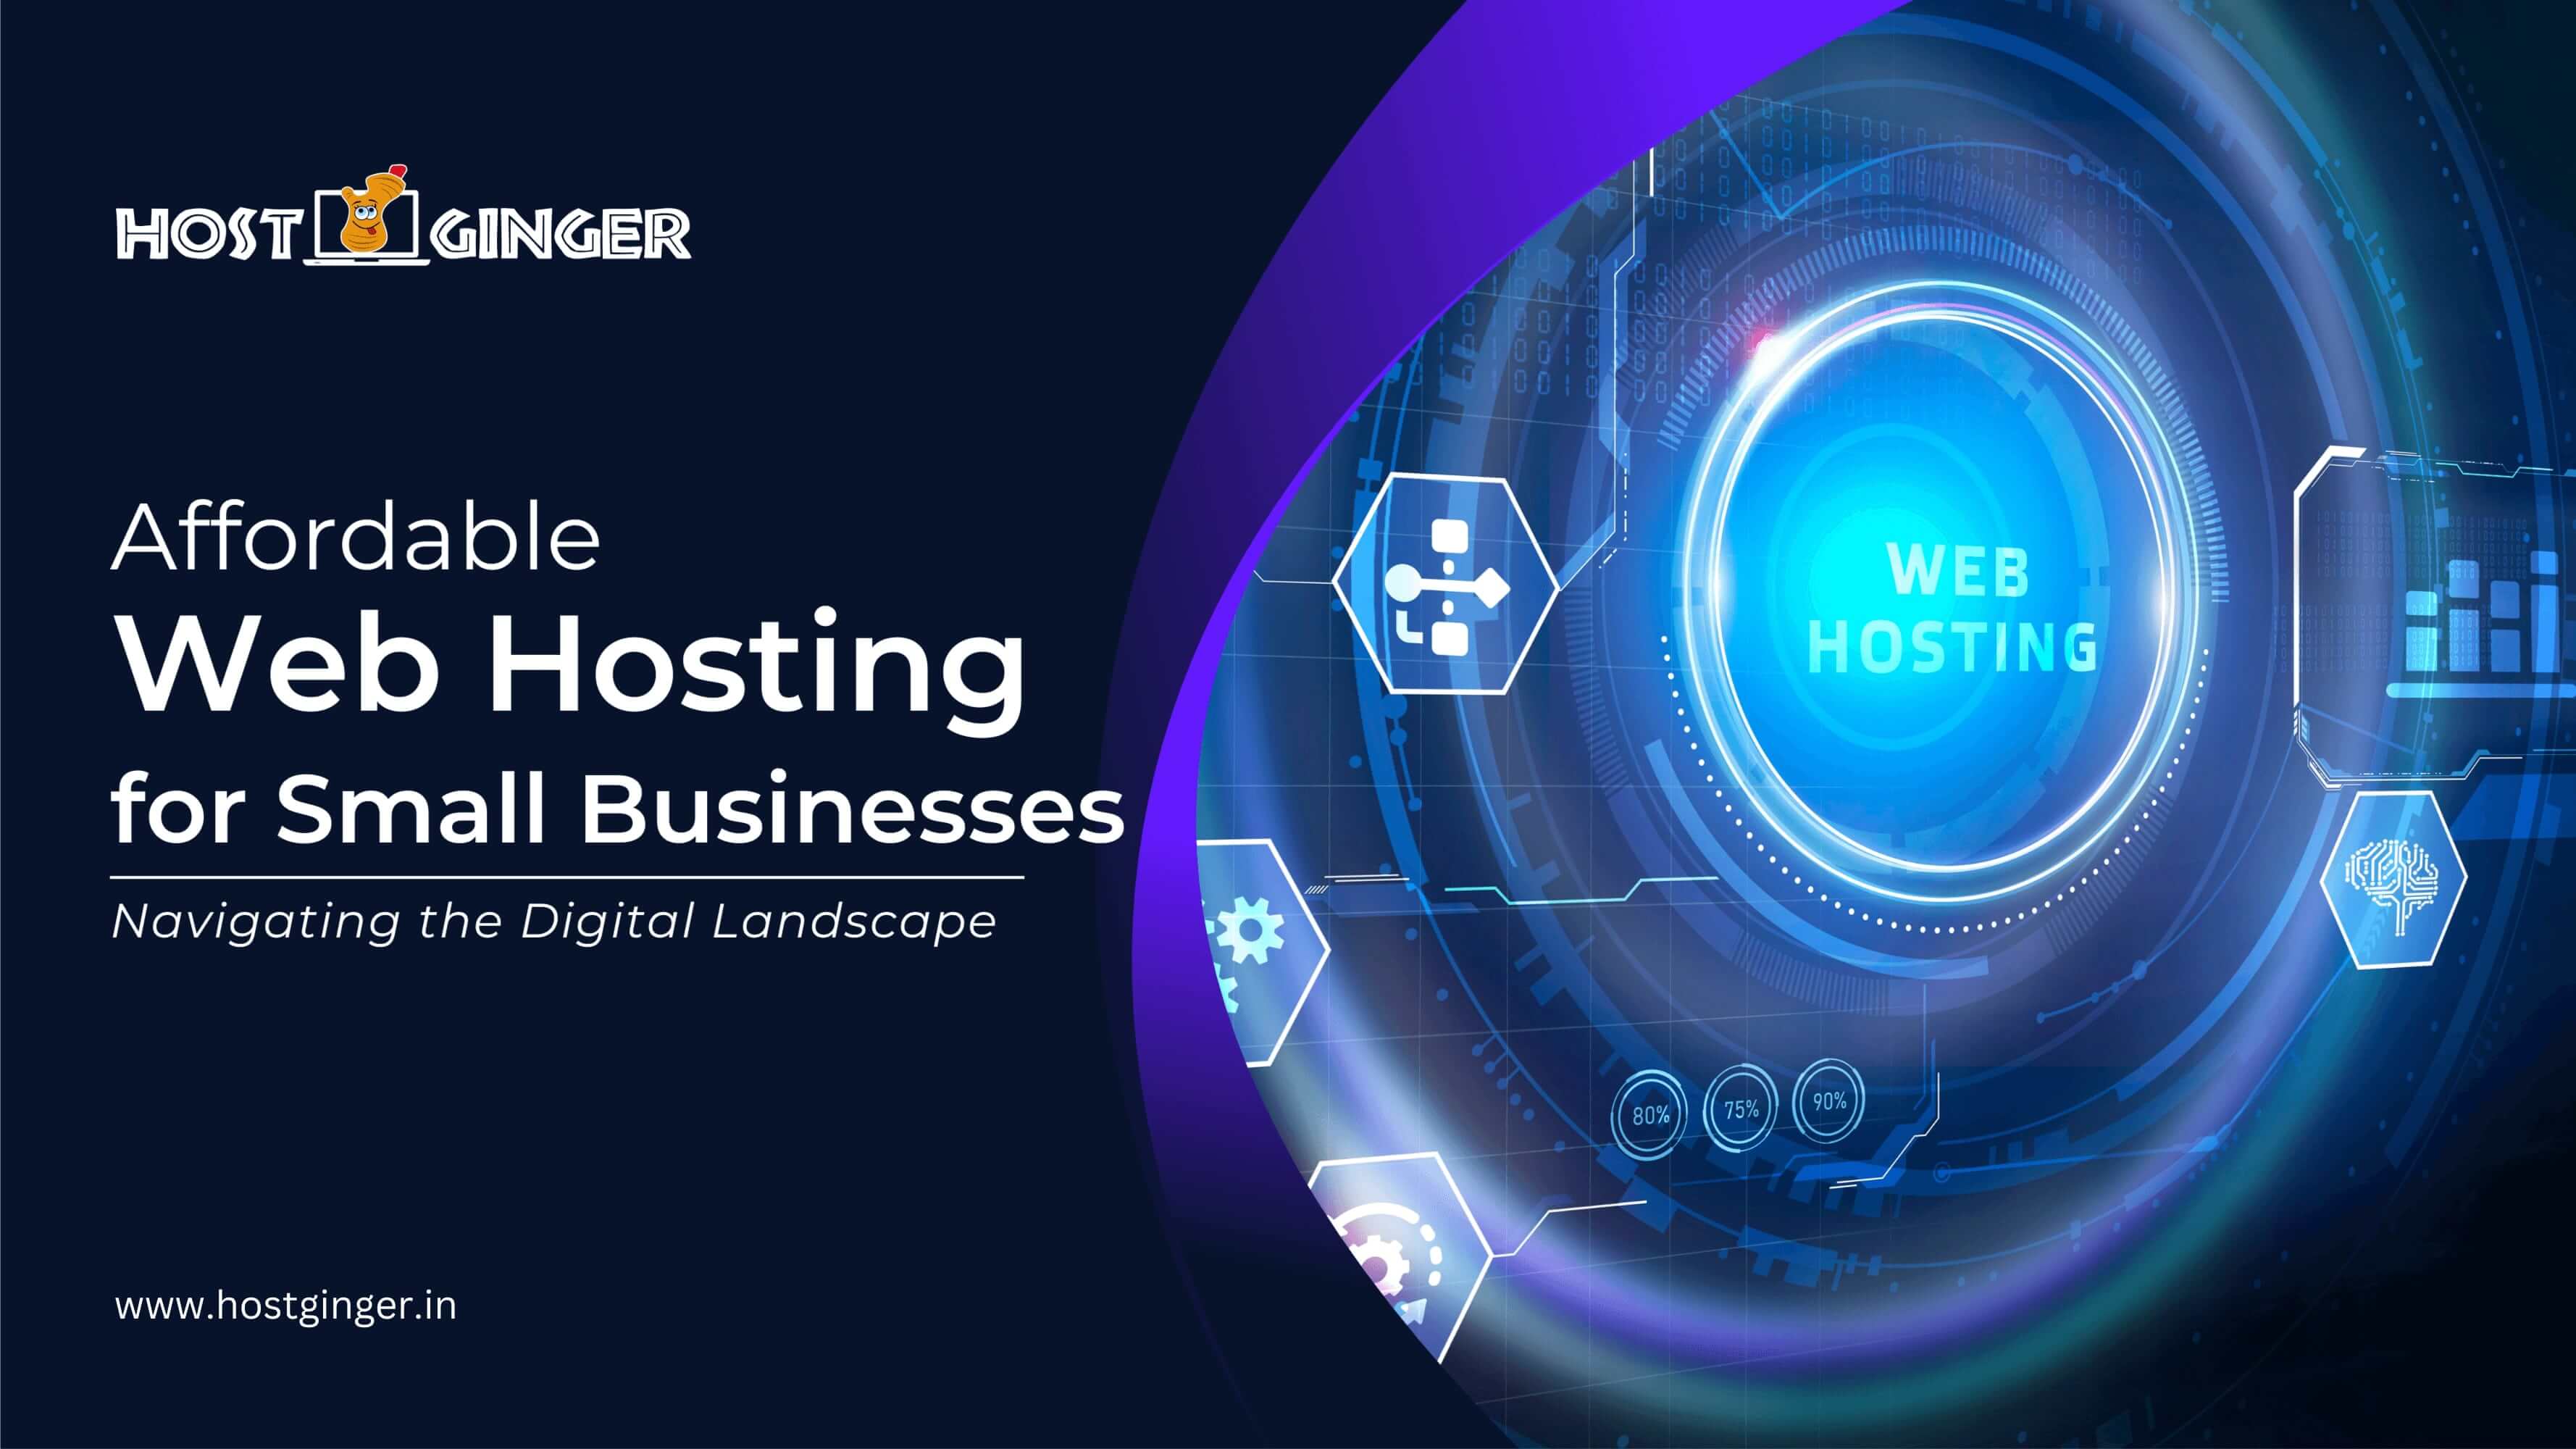 Affordable Web Hosting for Small Businesses